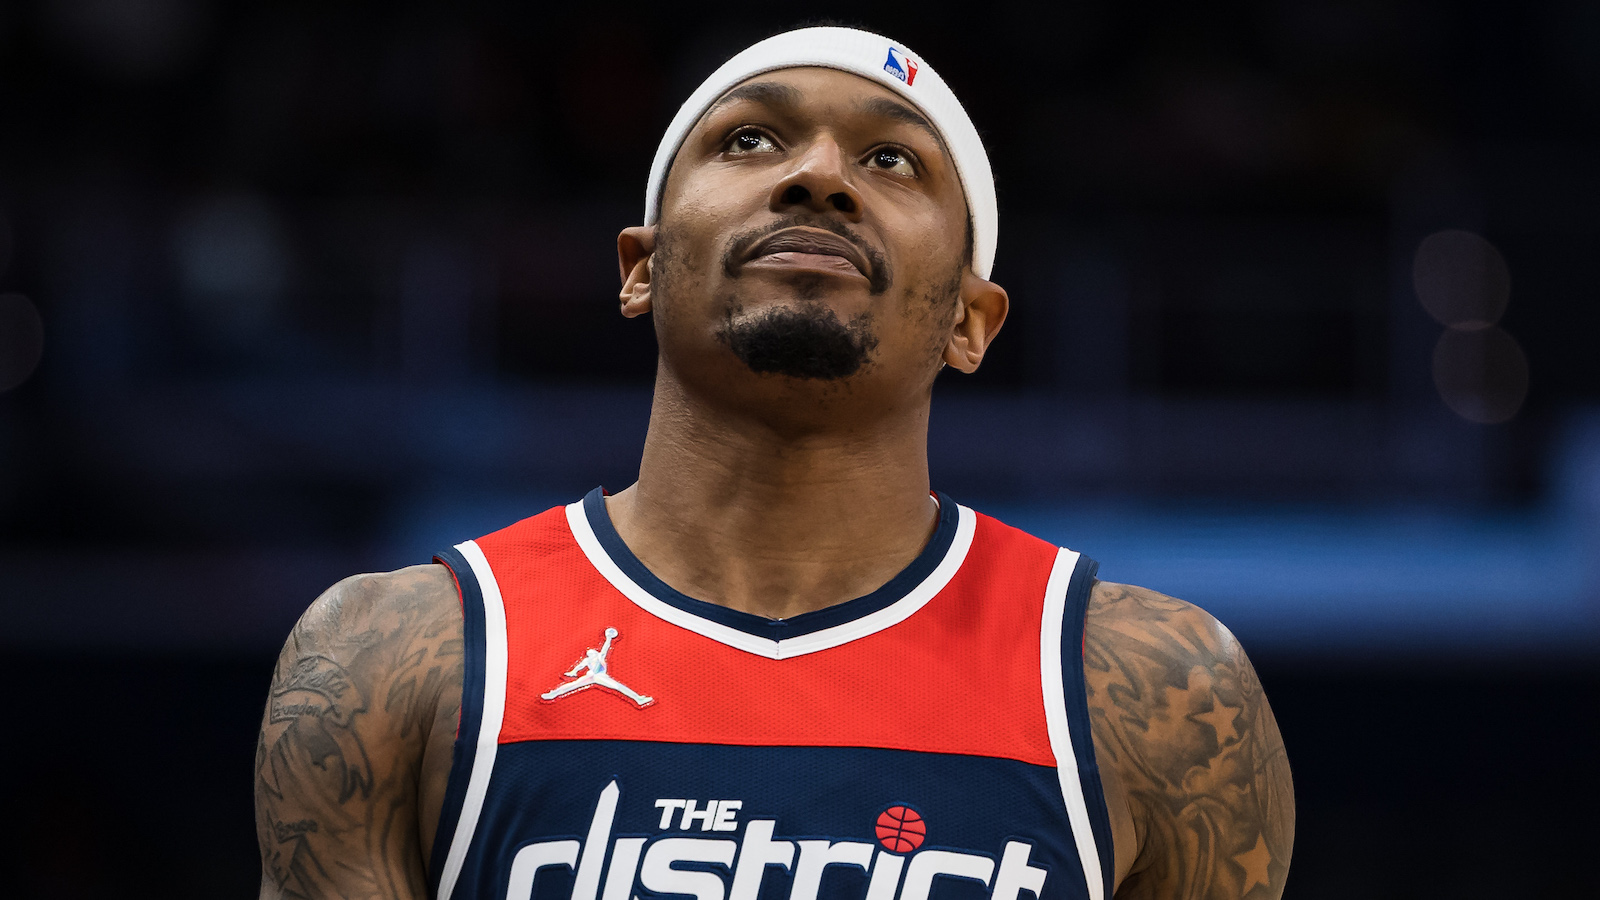 Bradley Beal enters his 30s with Suns, says he's ready to 'chase